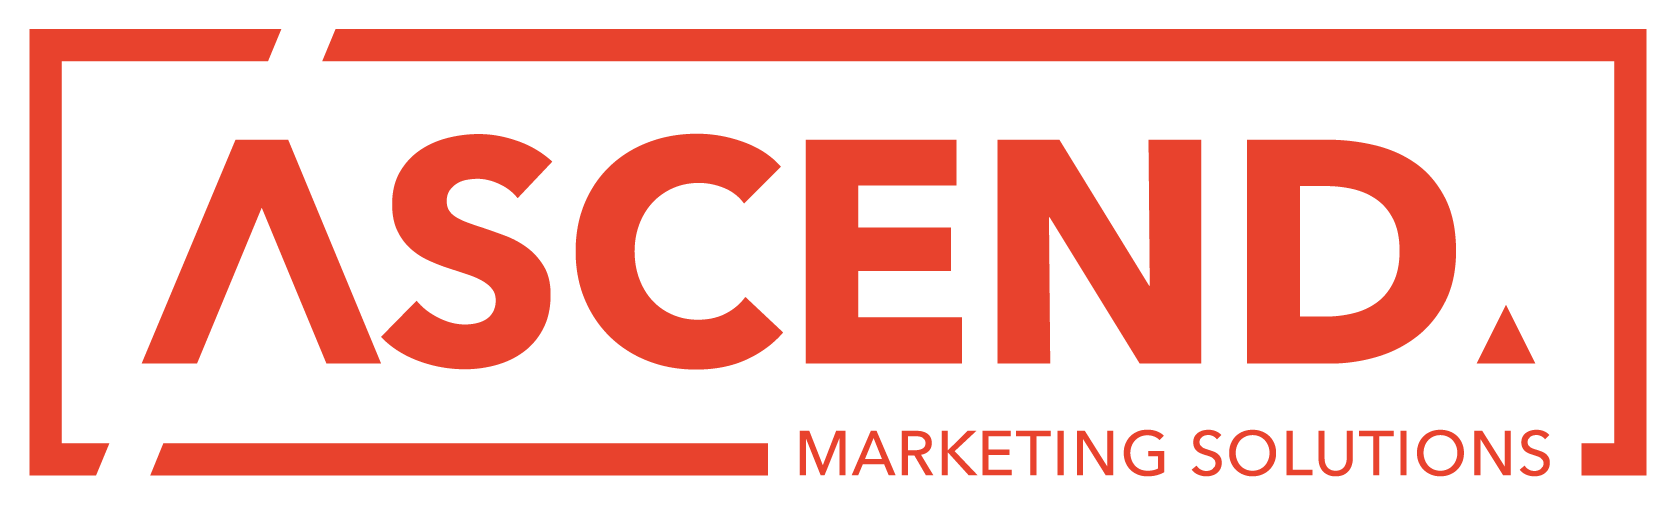 ASCEND Marketing Solutions